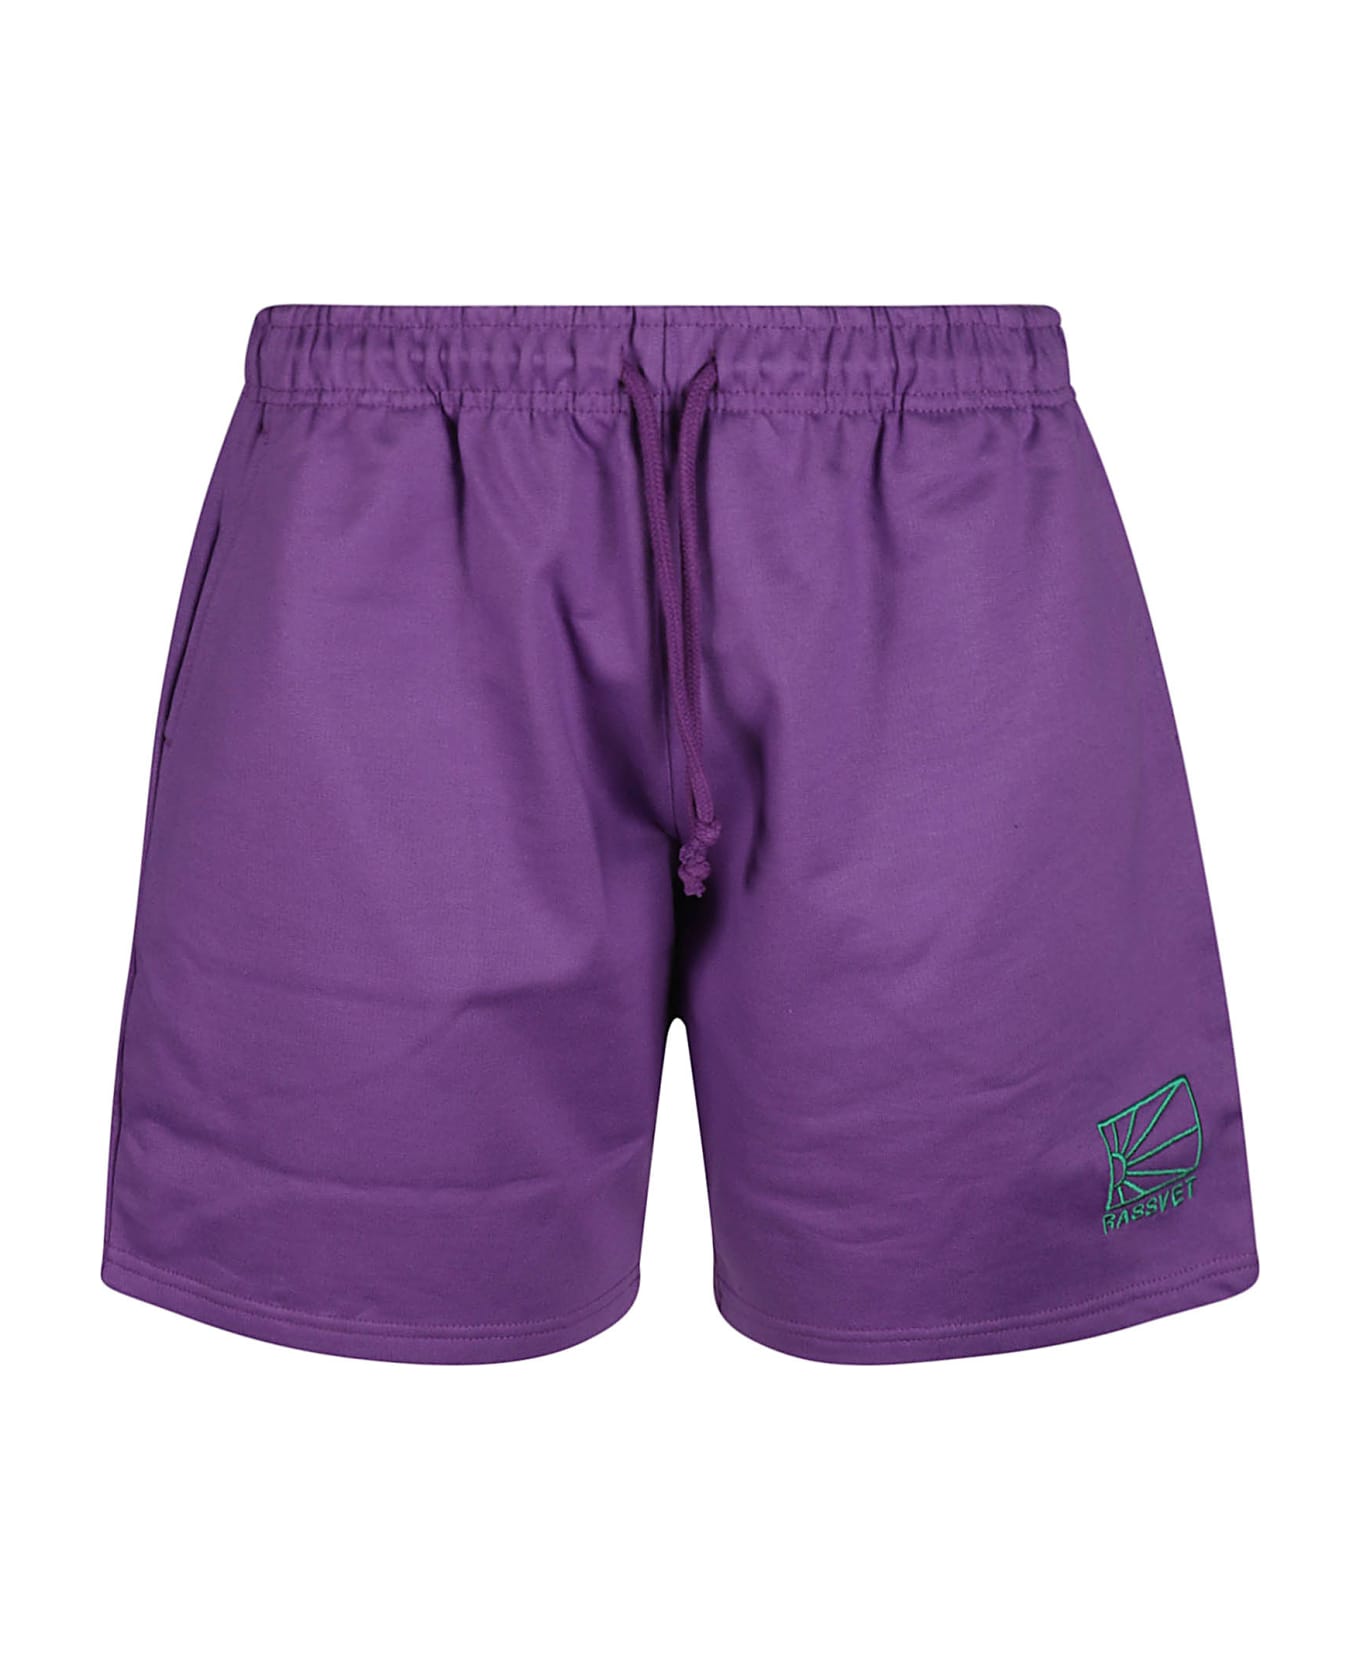 PACCBET Laced Shorts - Violet ショートパンツ